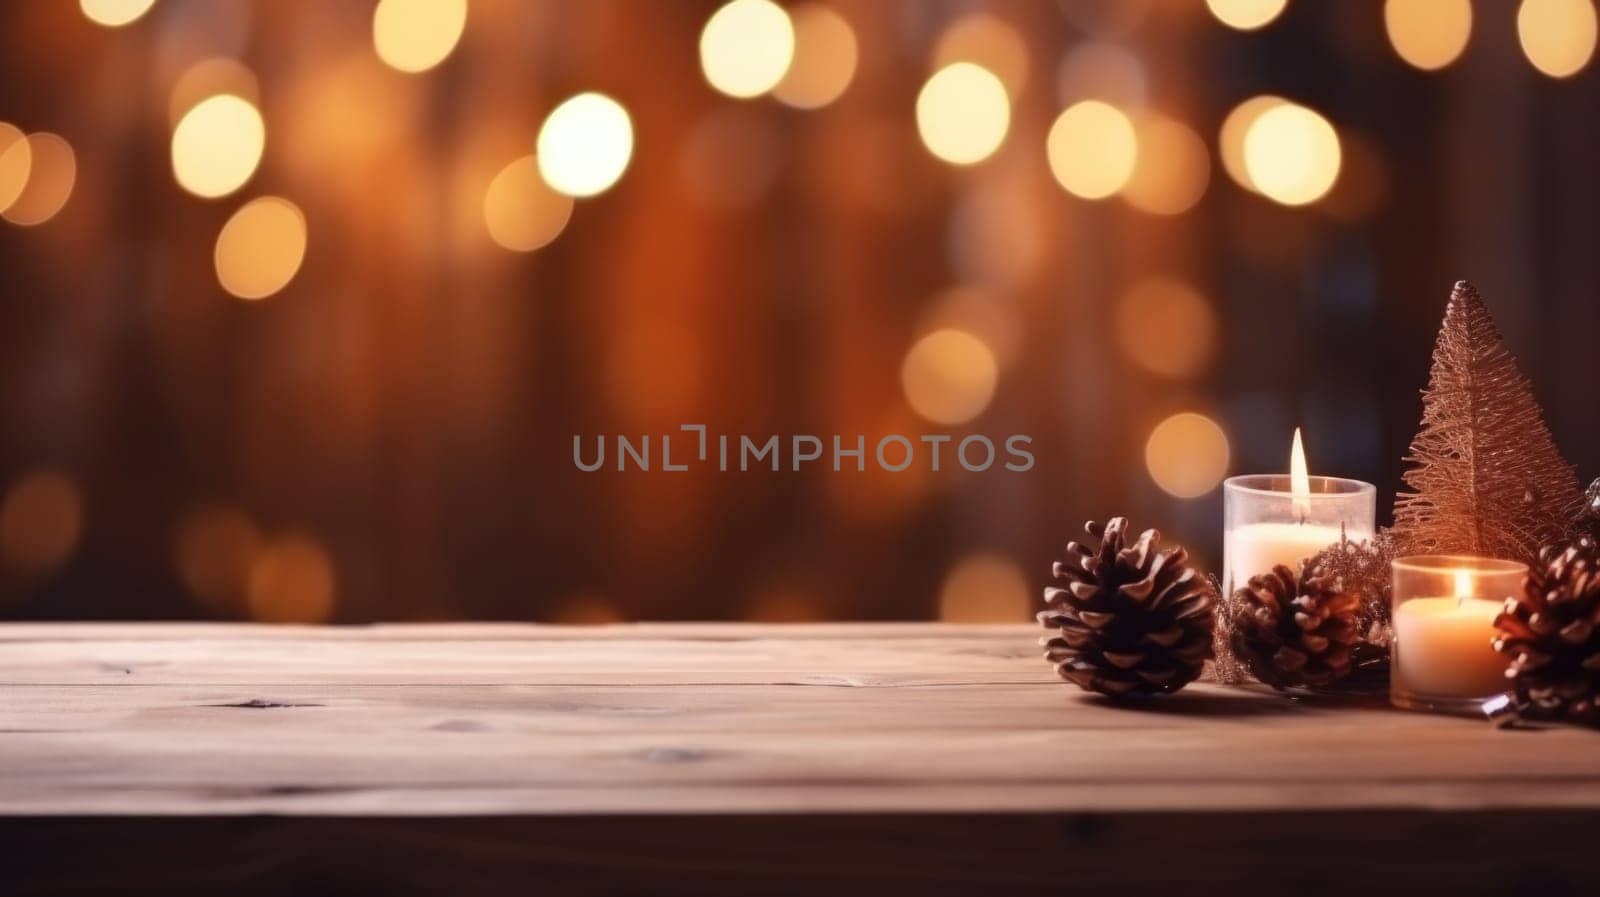 Merry Christmas and Happy New Year background with empty wooden table comeliness by biancoblue